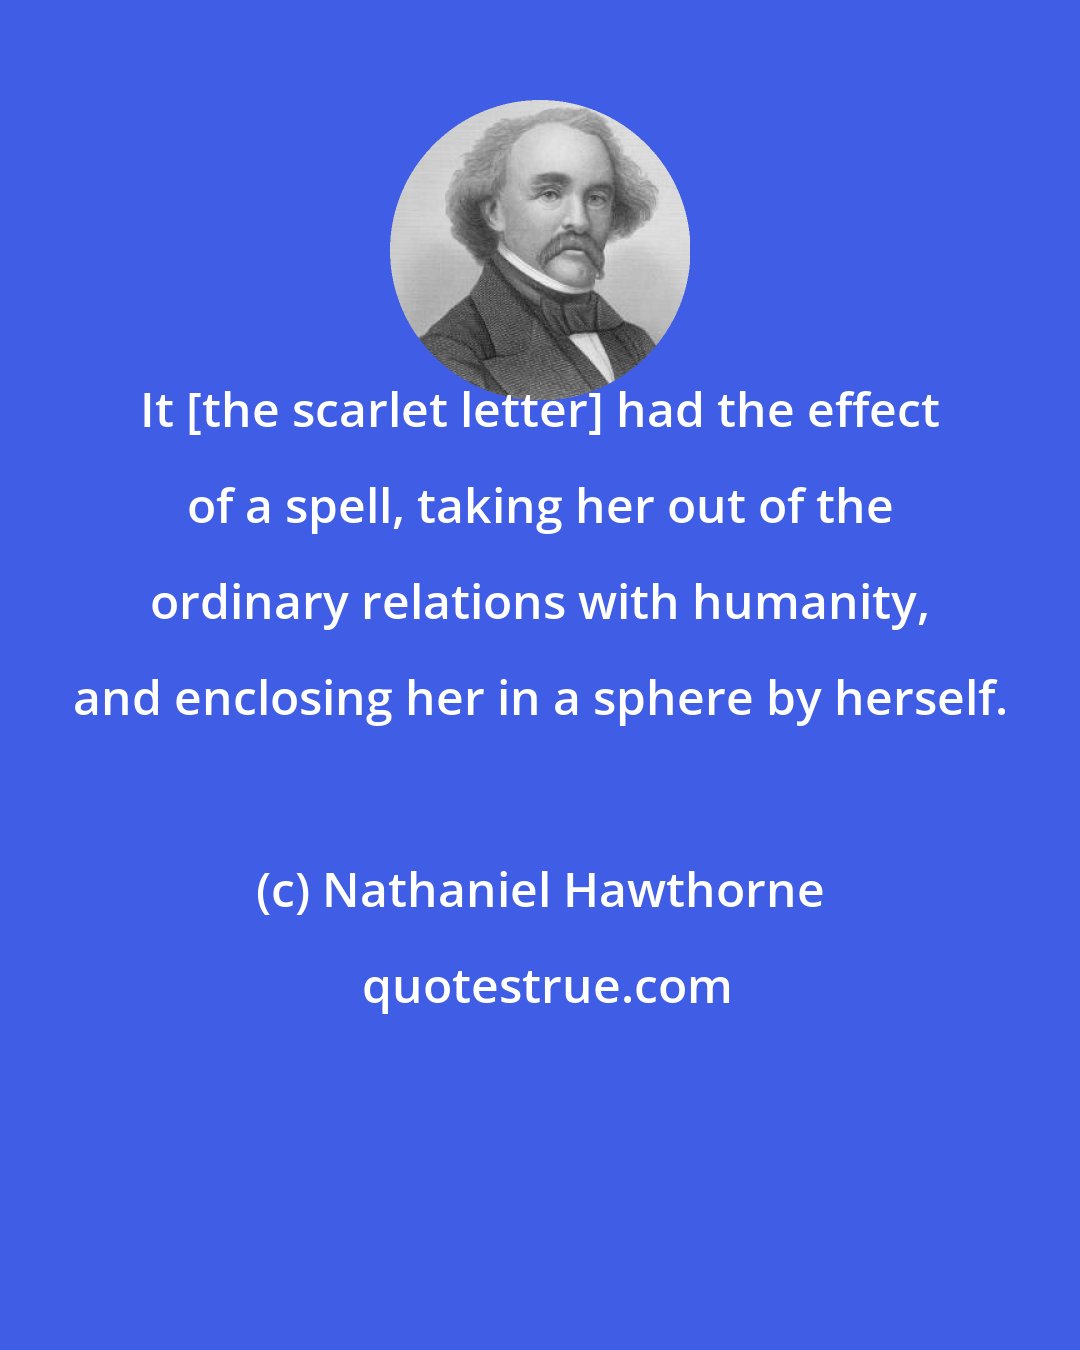 Nathaniel Hawthorne: It [the scarlet letter] had the effect of a spell, taking her out of the ordinary relations with humanity, and enclosing her in a sphere by herself.